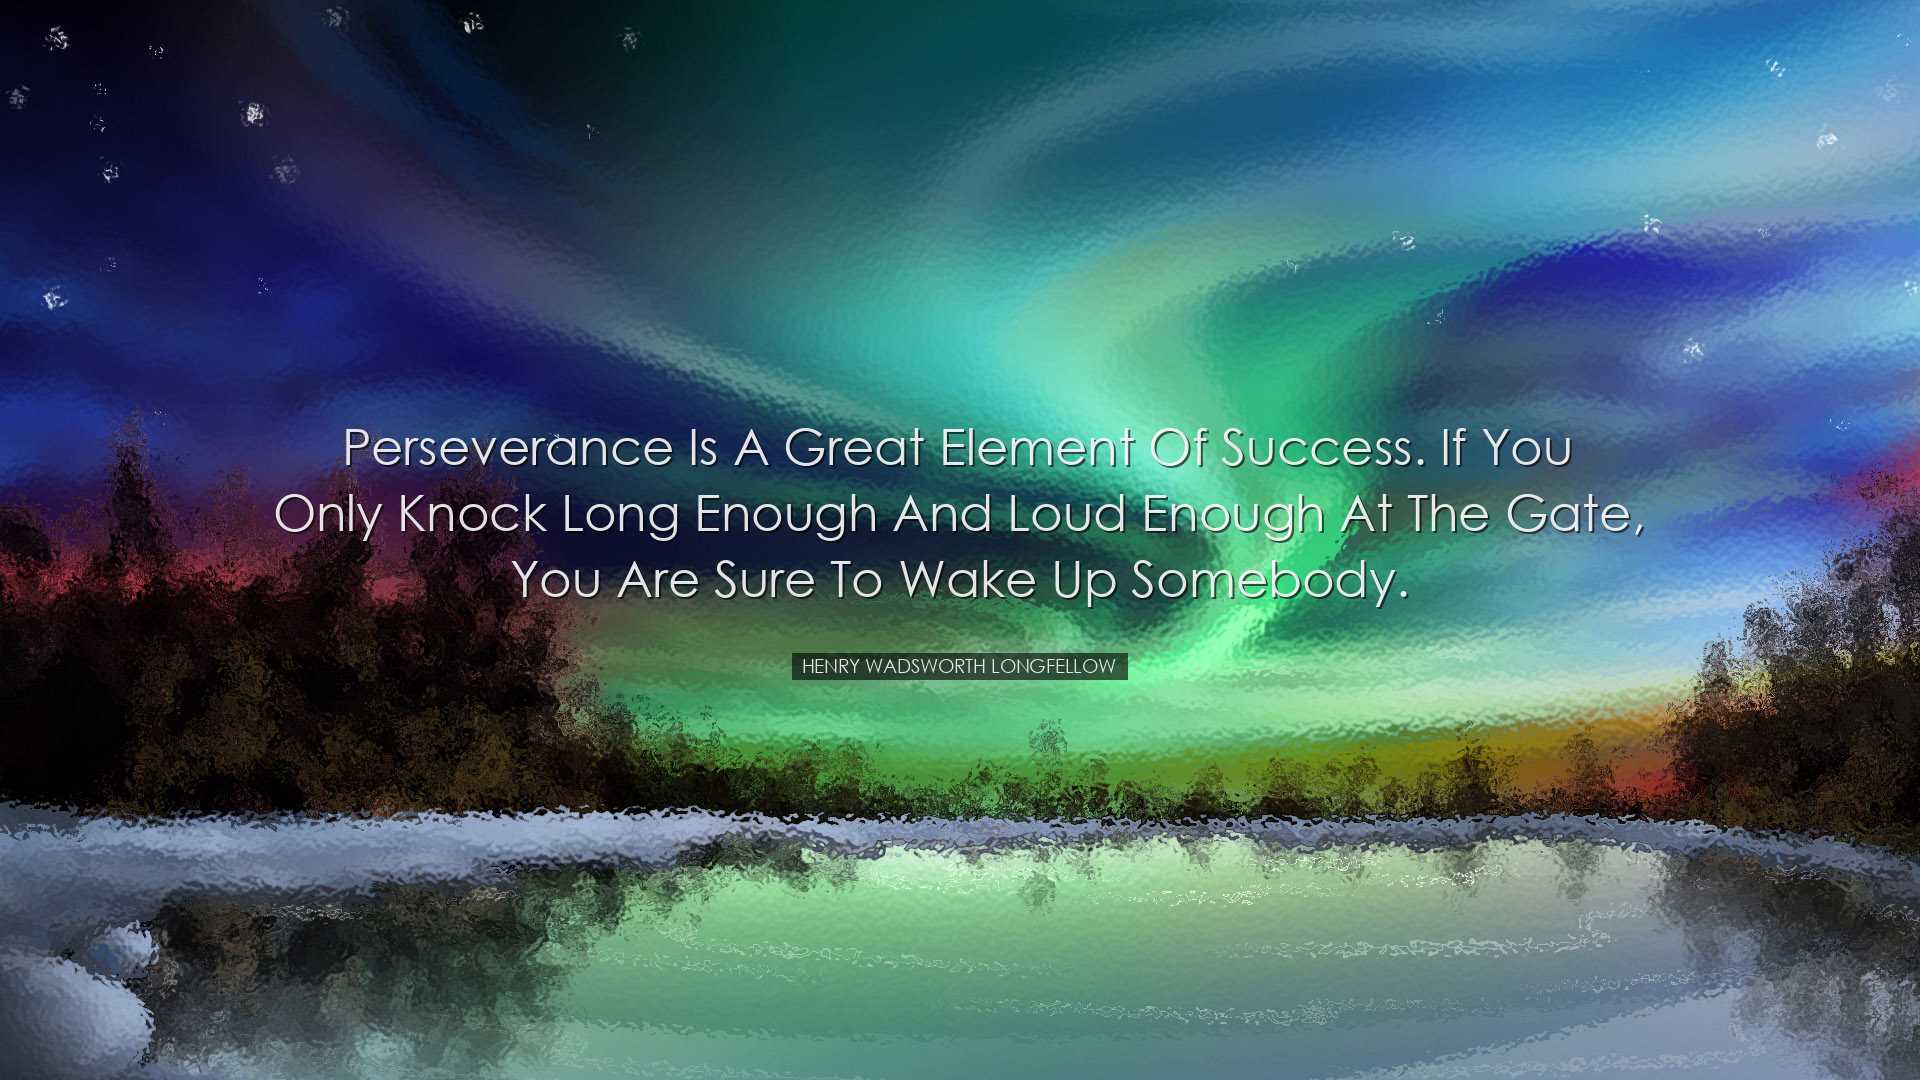 Perseverance is a great element of success. If you only knock long